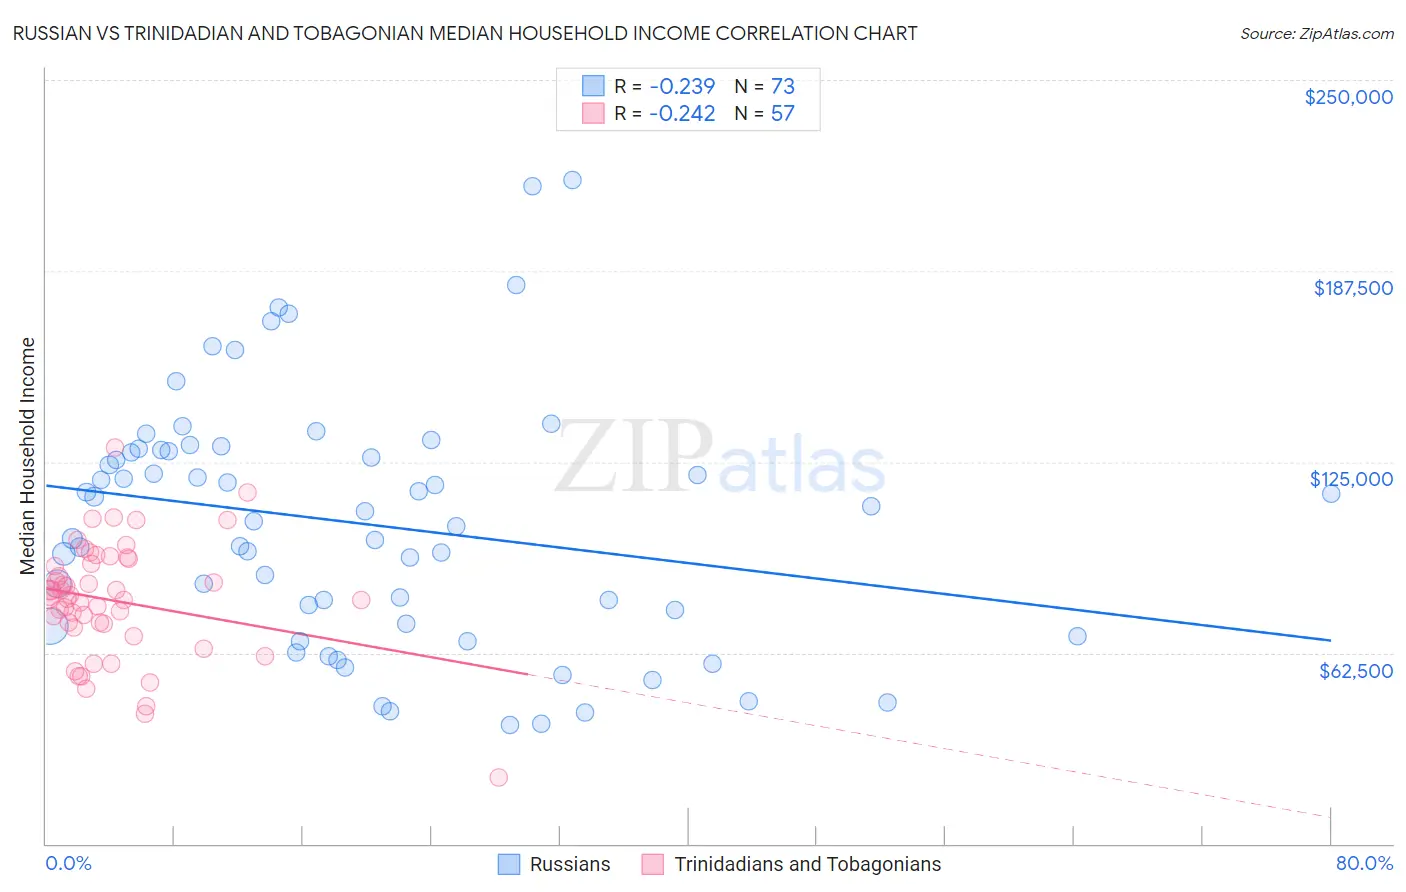 Russian vs Trinidadian and Tobagonian Median Household Income